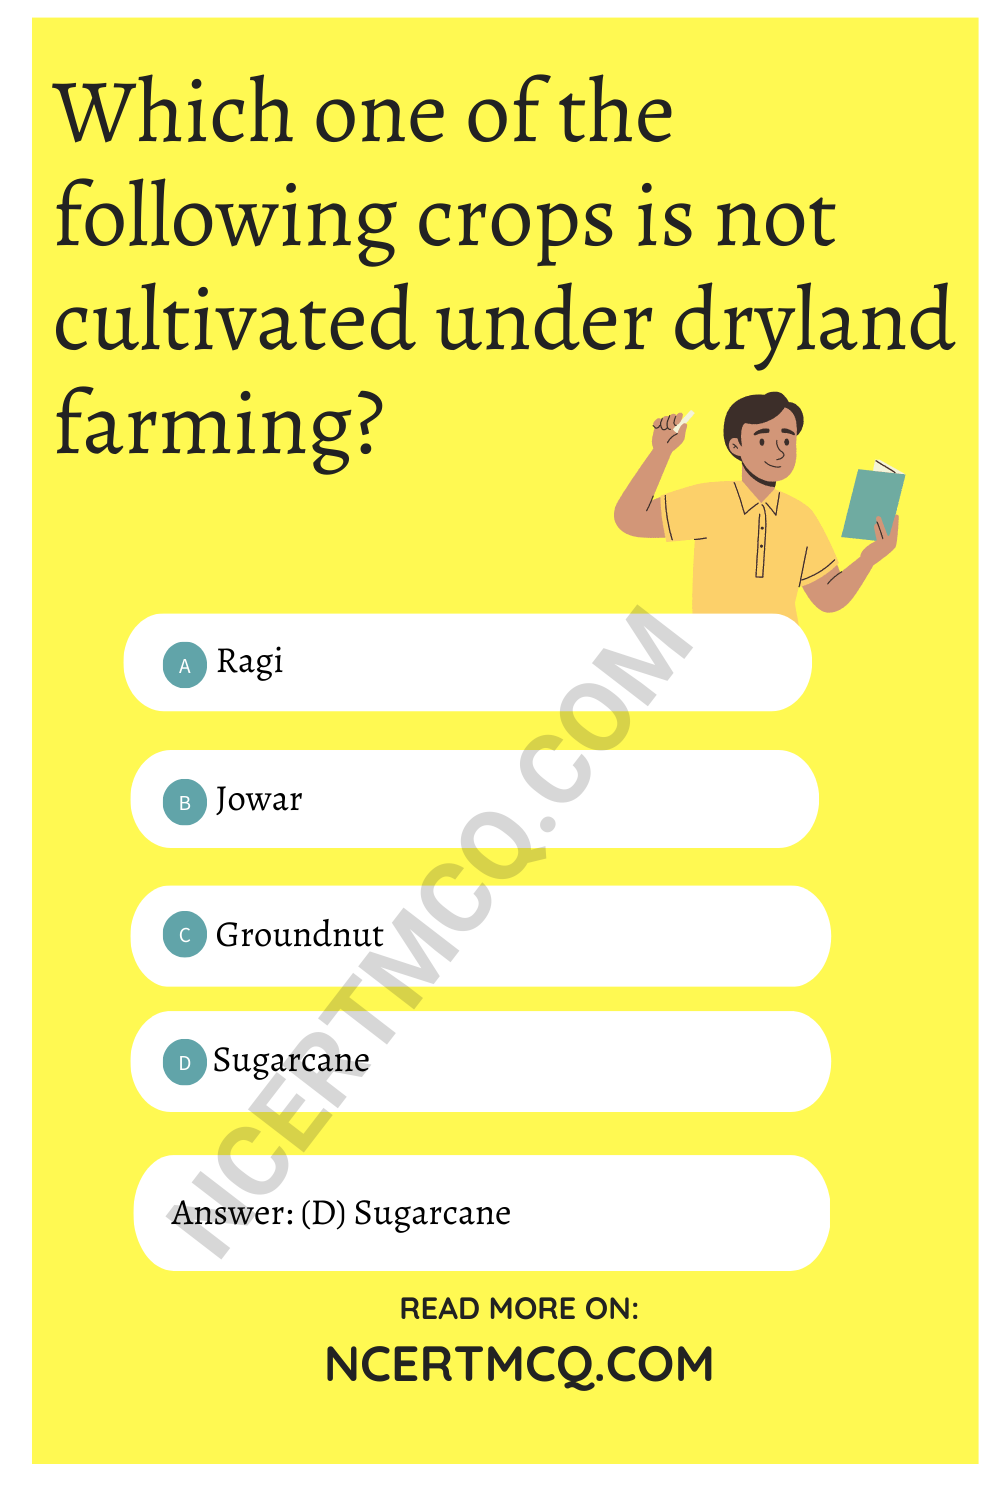 Which one of the following crops is not cultivated under dryland farming?